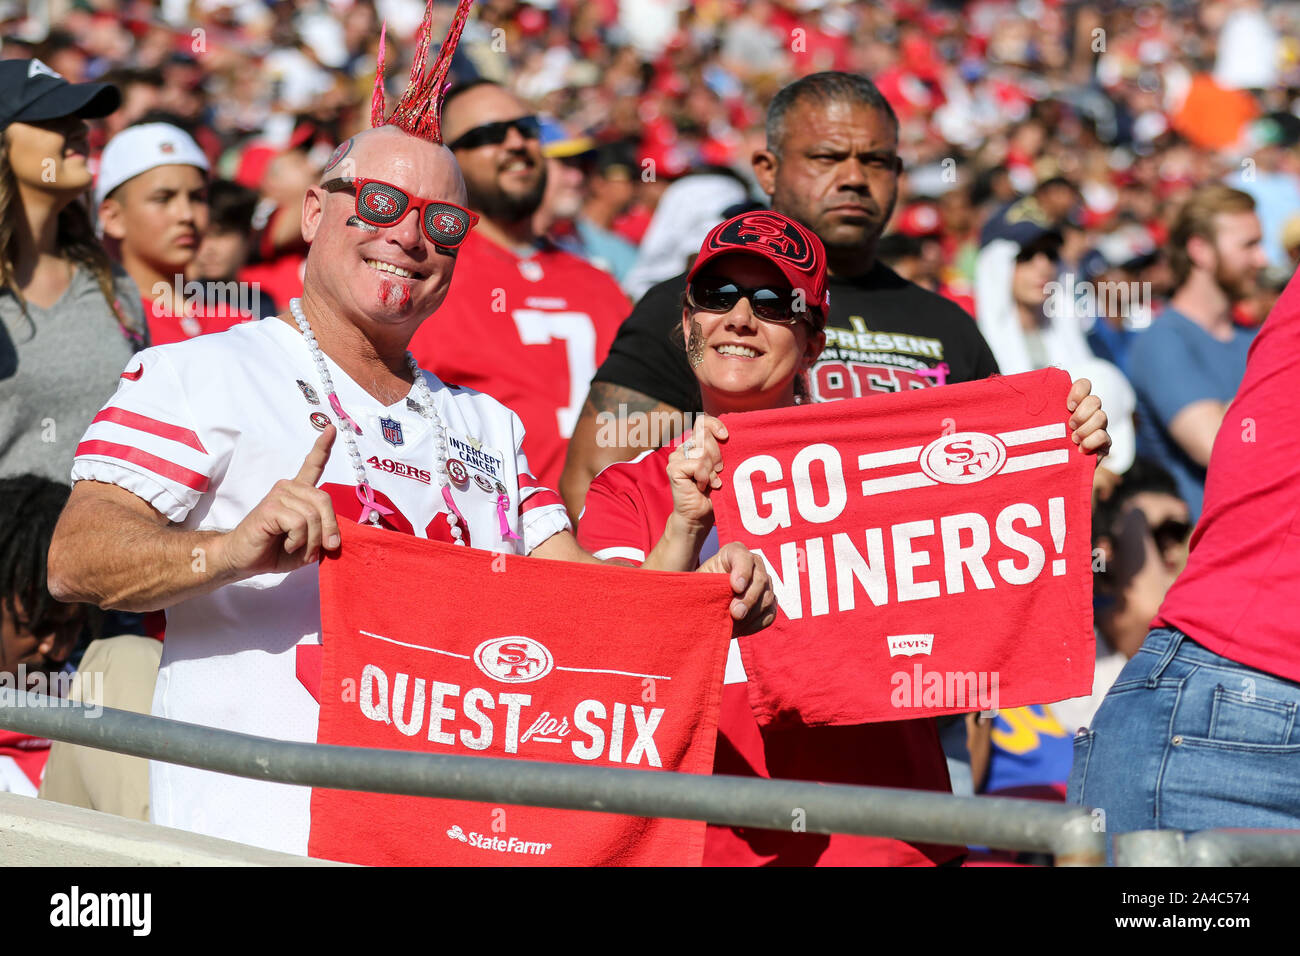 Los Angeles, CA. 13th Oct, 2019. San Francisco 49ers fans during the NFL game between San Francisco 49ers vs Los Angeles Rams at the Los Angeles Memorial Coliseum in Los Angeles, Ca on October 13, 2019. Photo by Jevone Moore. Credit: csm/Alamy Live News Stock Photo